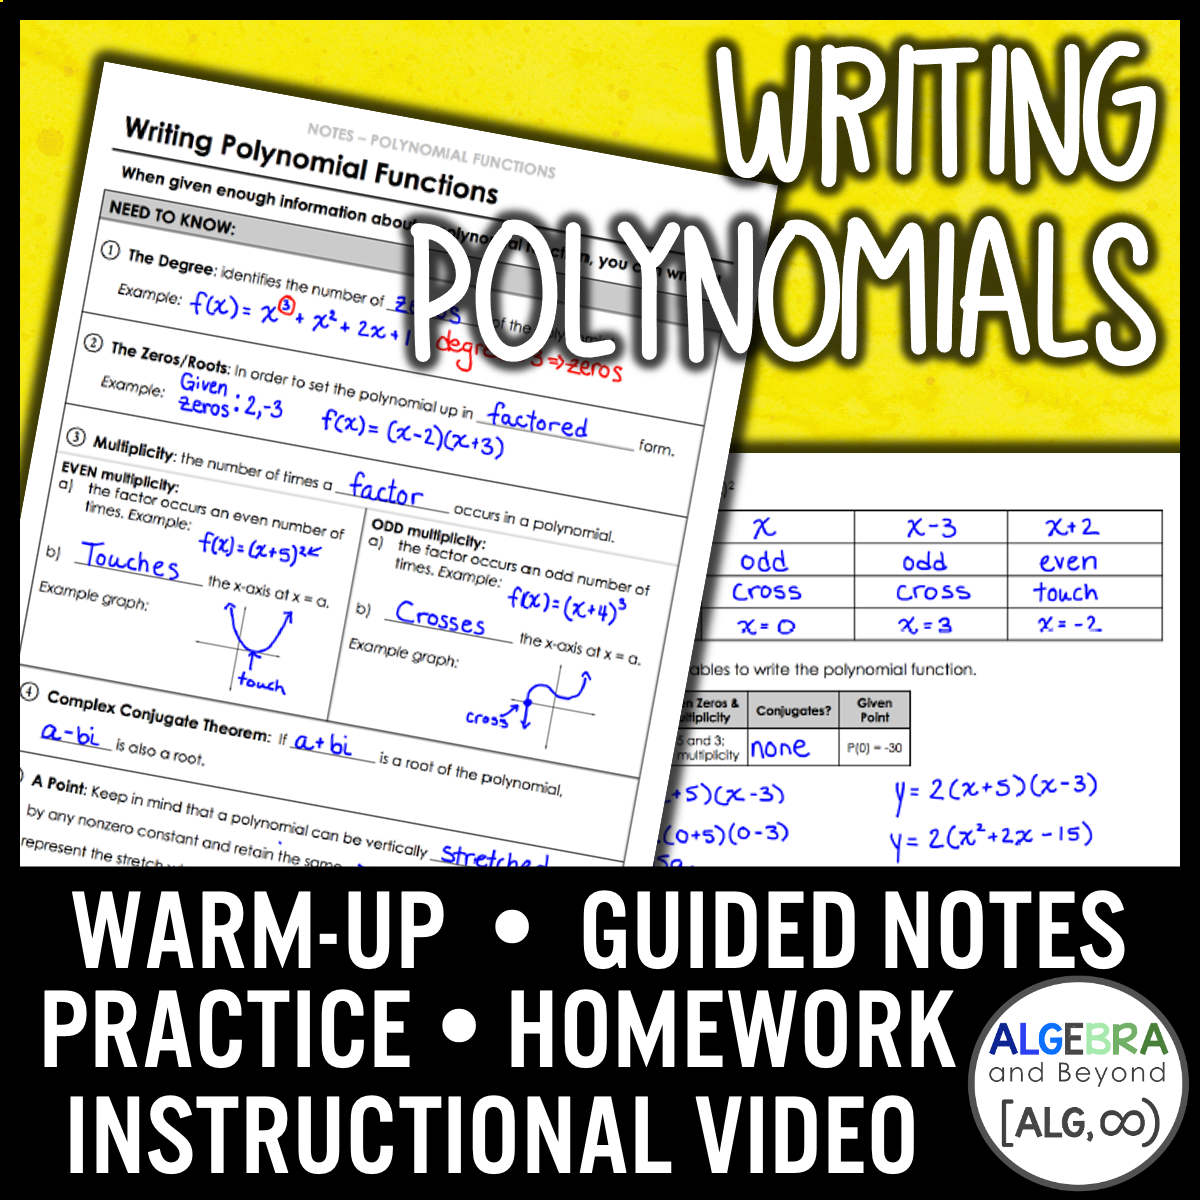 Writing Polynomials Lesson | Video | Guided Notes | Homework